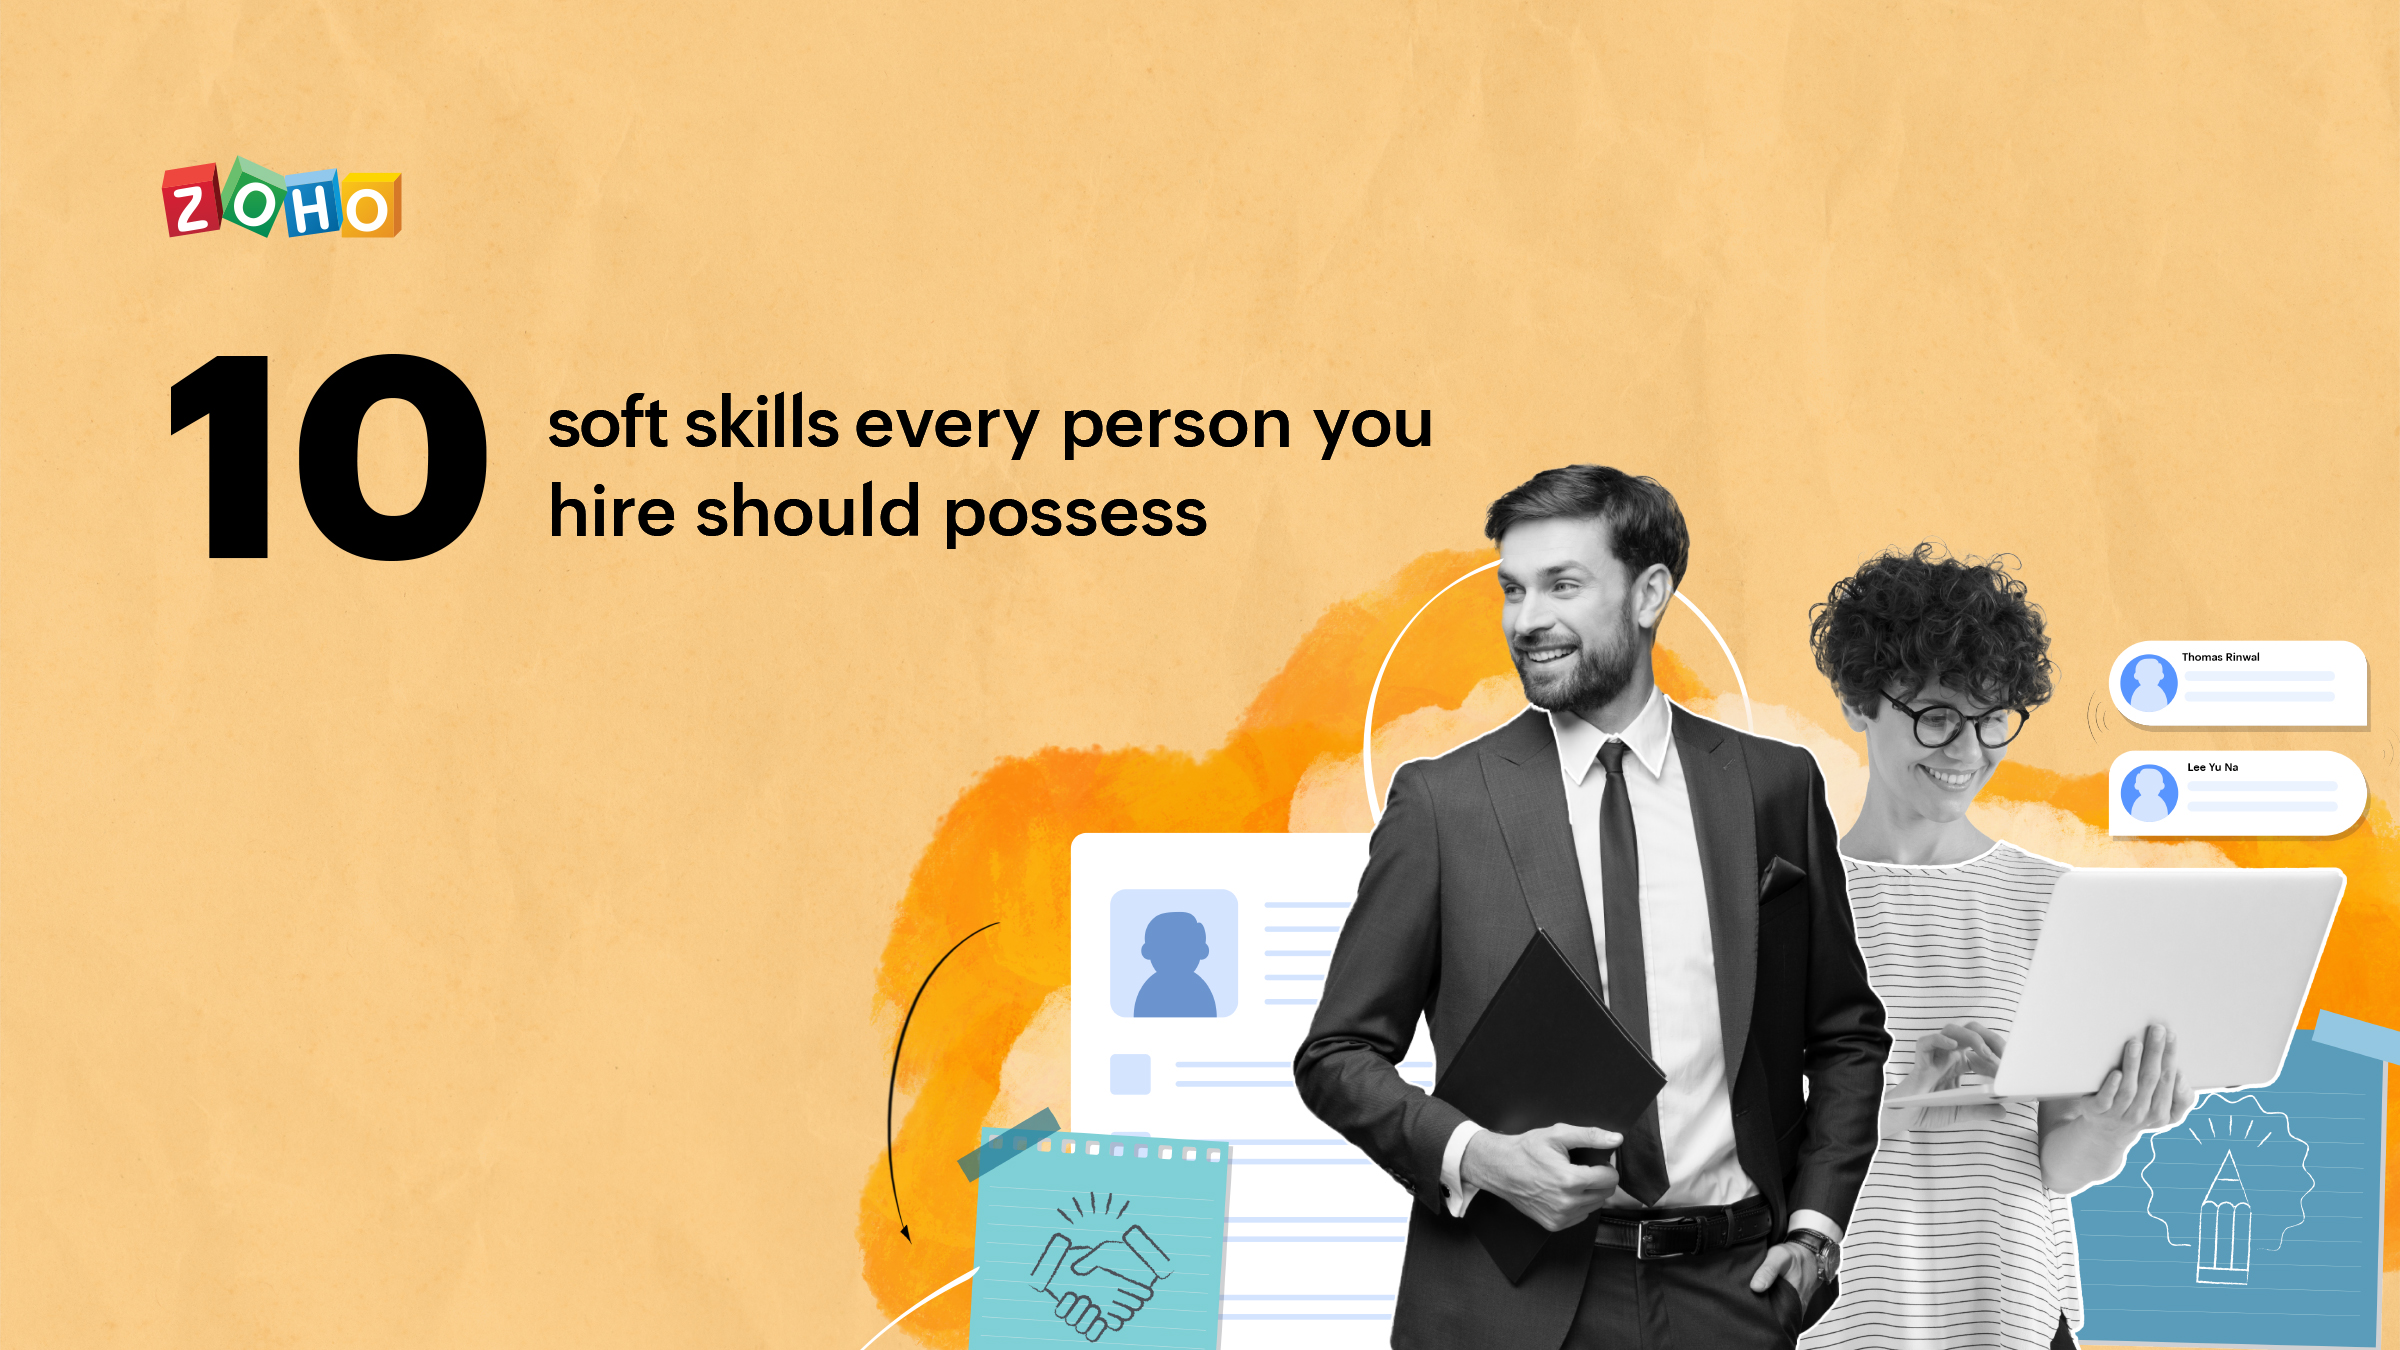 10 soft skills every person you hire should possess